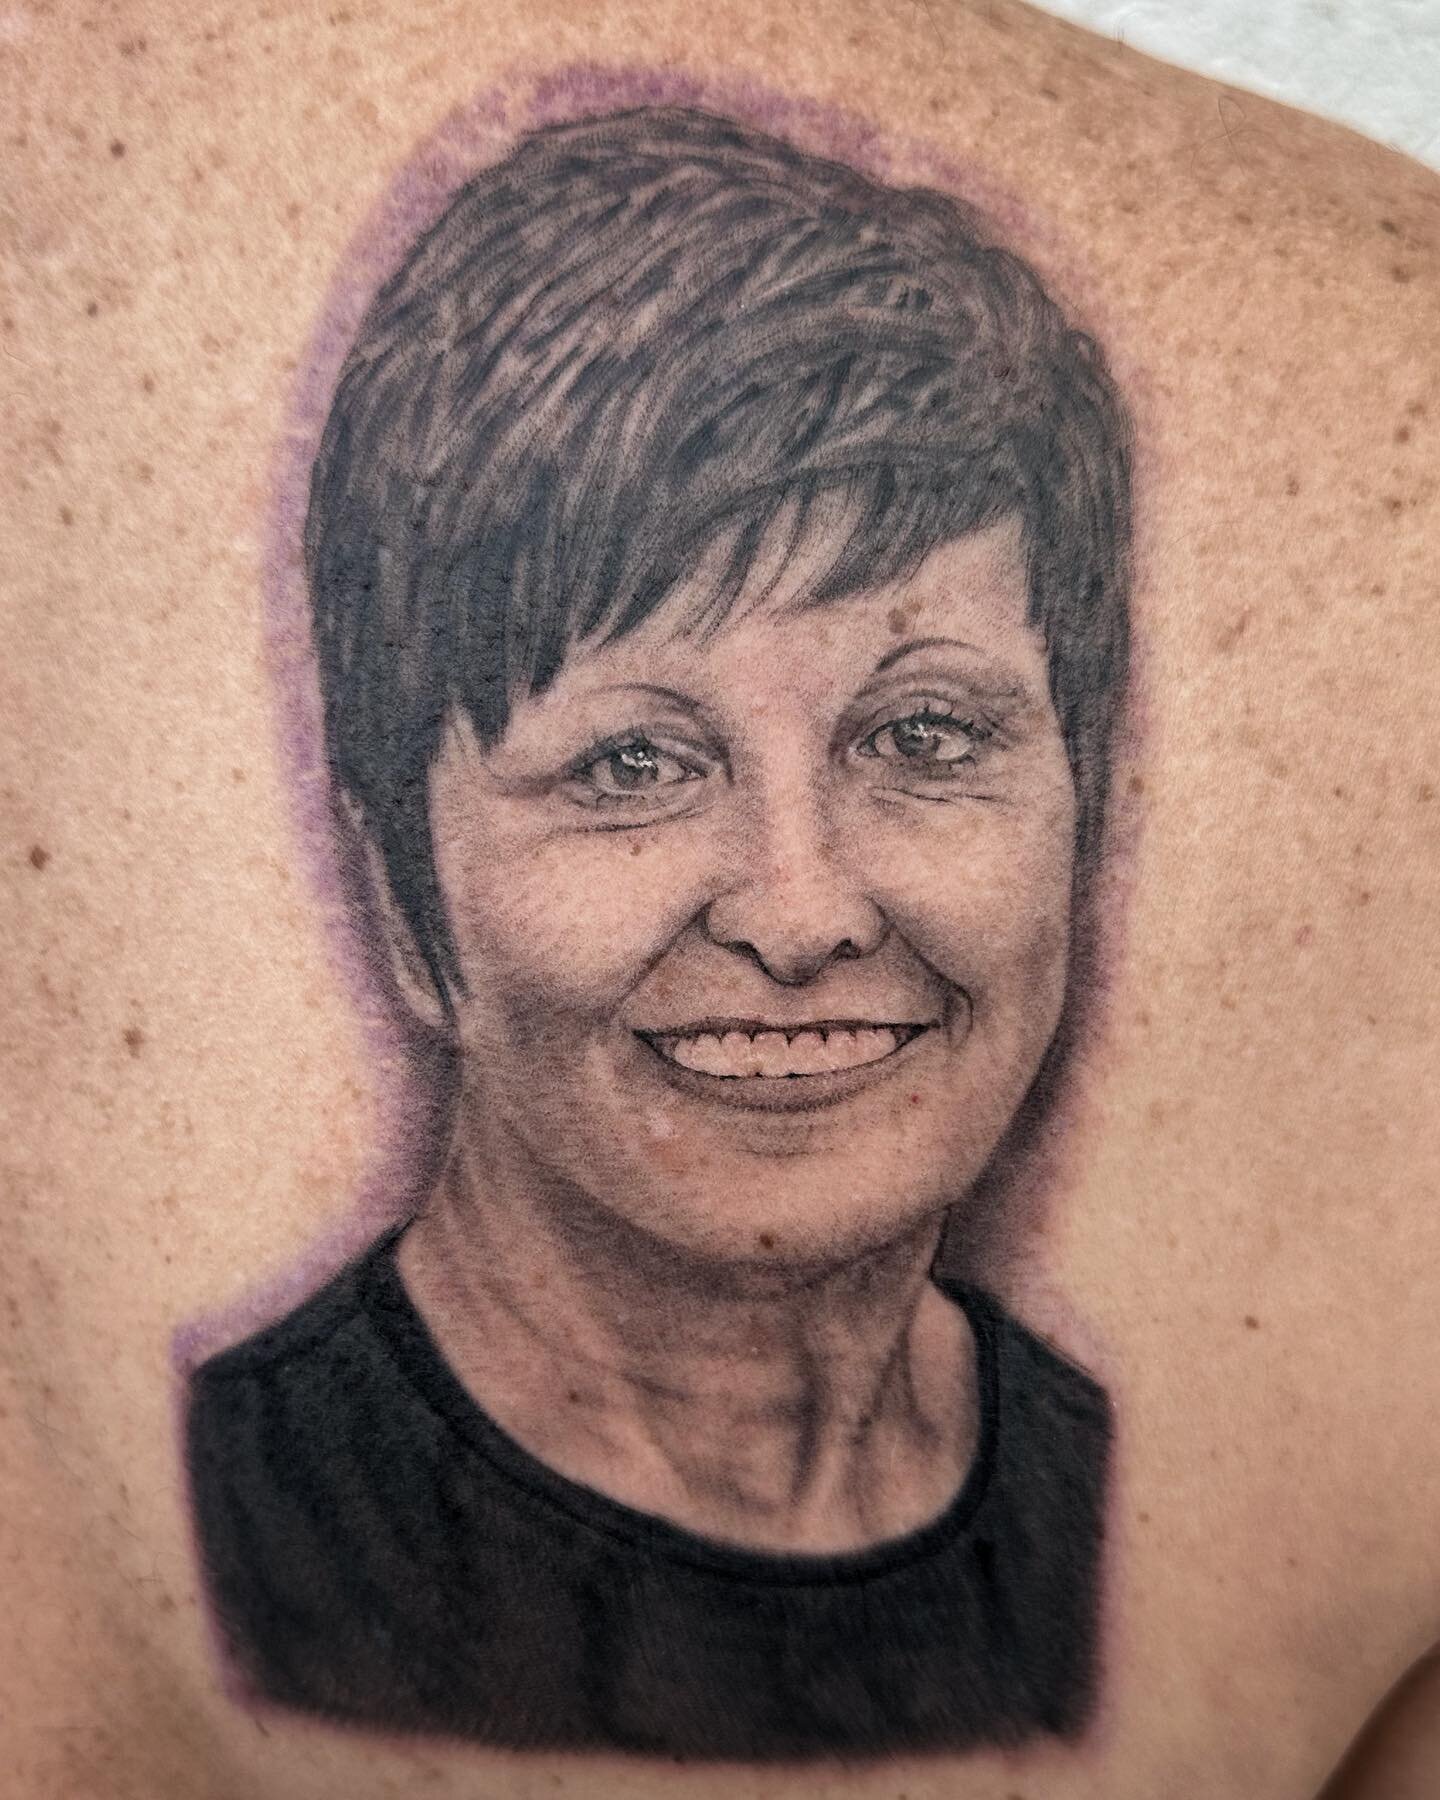 First Memorial Portrait done✨Such an honor trusting me with this 🥺Bring in more beautiful faces !🙏🏽 #portrait #portraittattoo #blackandgreytattoo #blackandgrey #ink #nwa #rogers #rogersarkansas #nwatattoo #dynamic #tattoo #tattooartist #fkirons #i